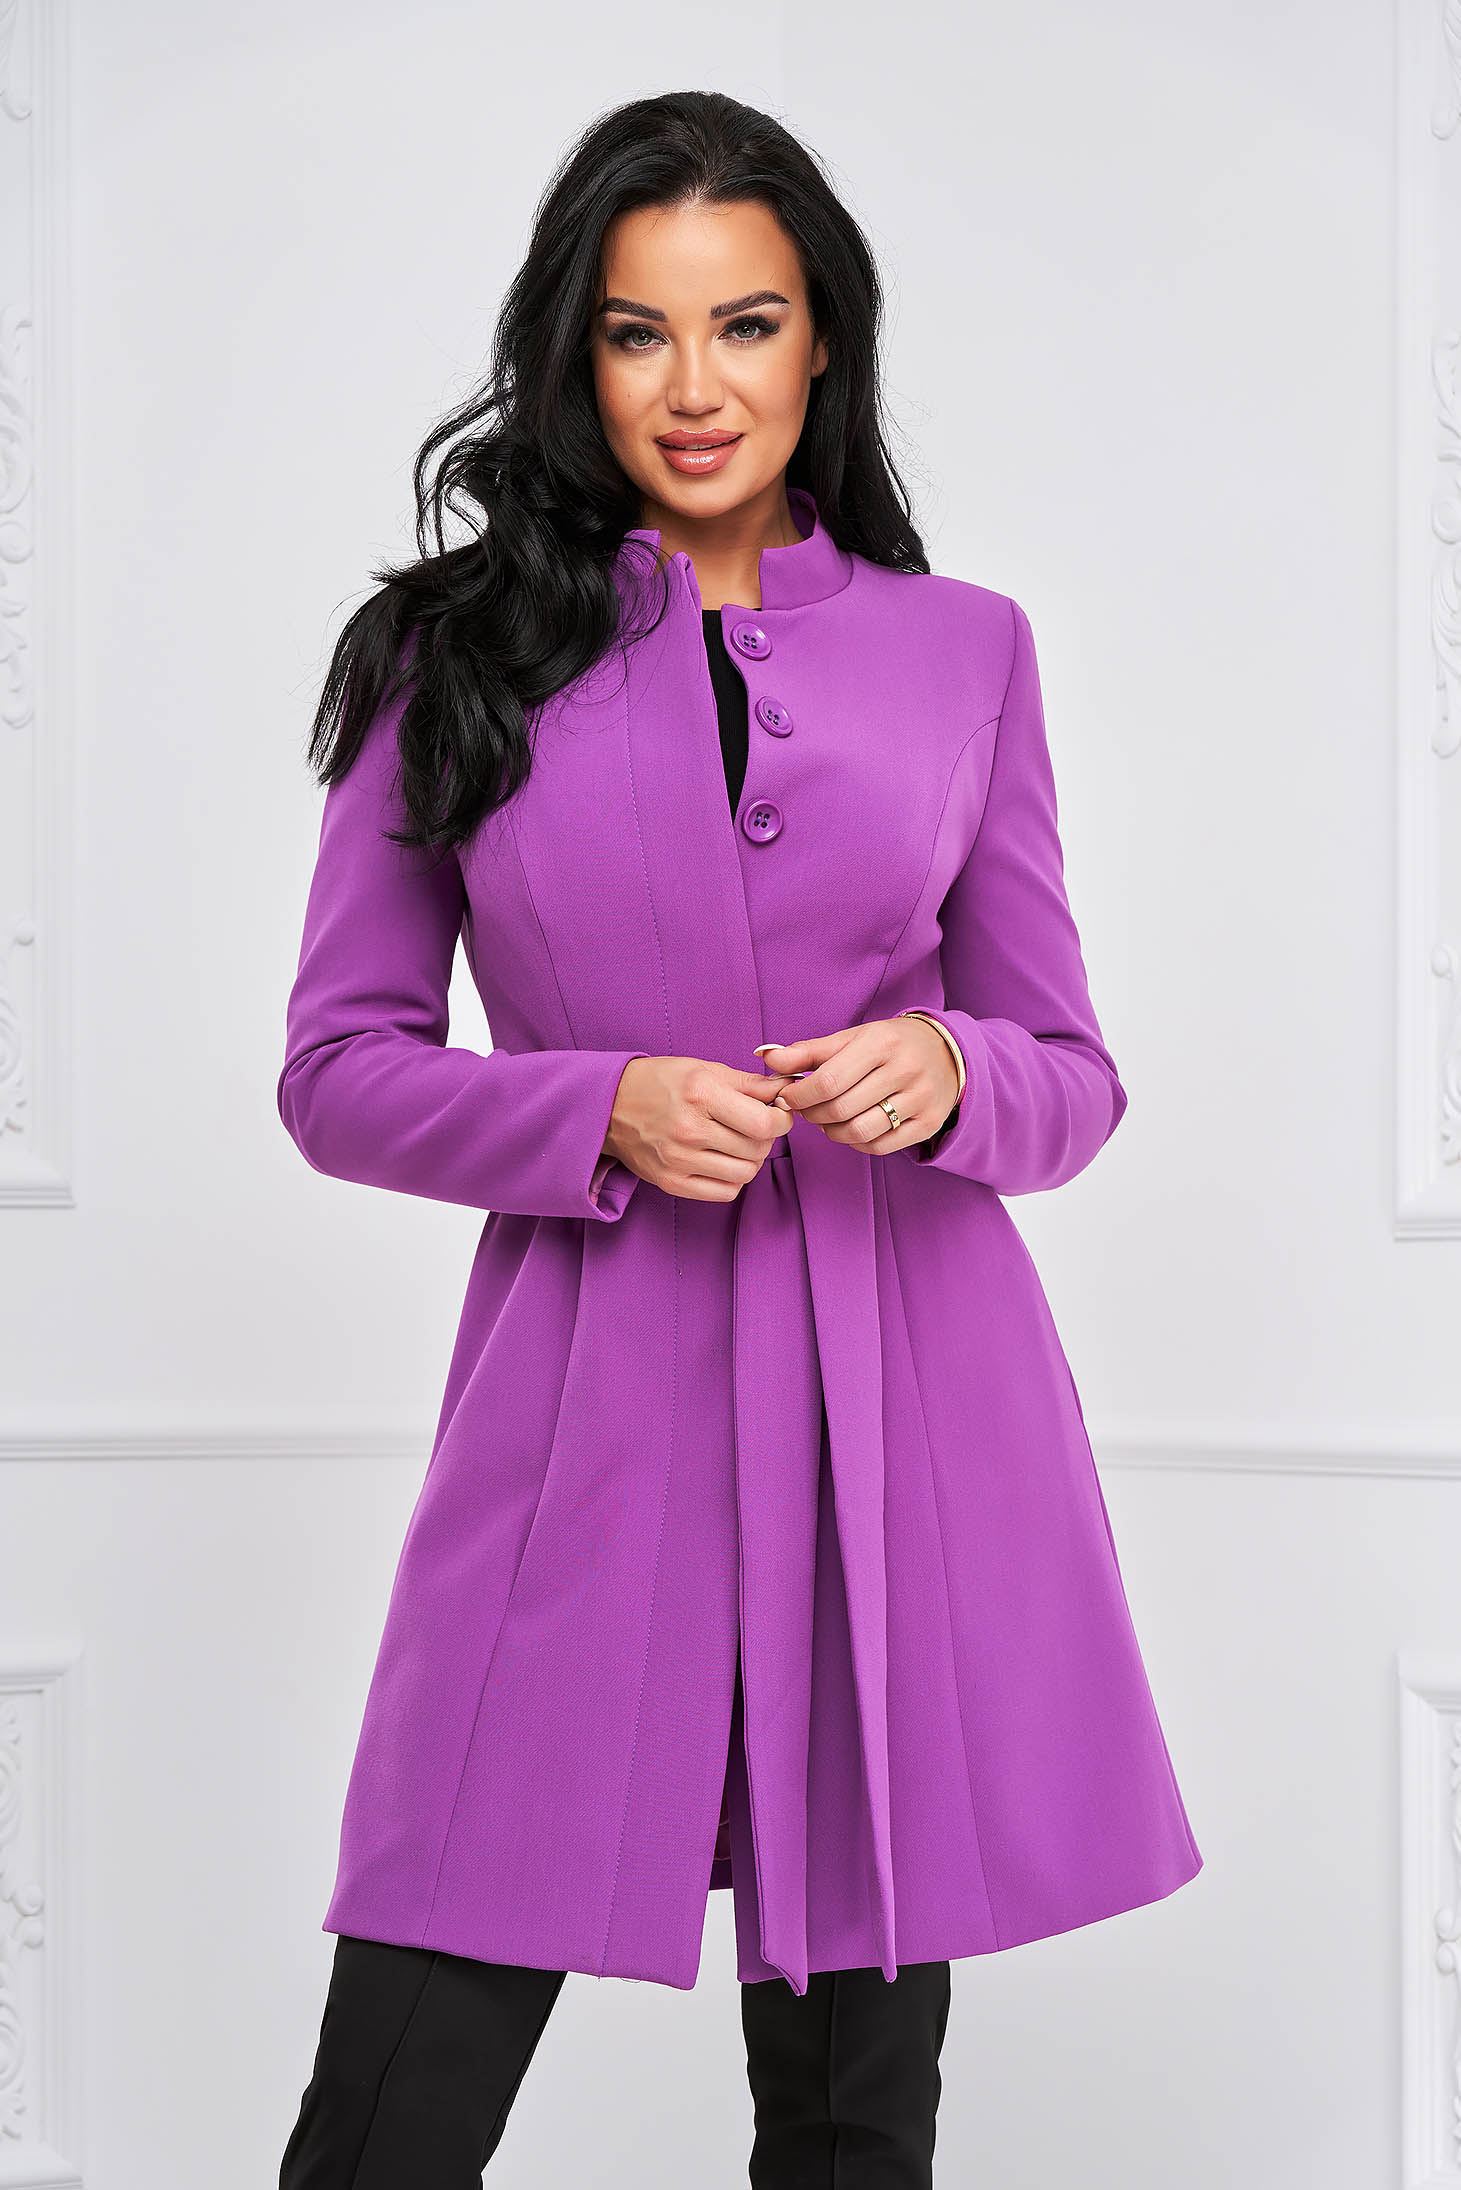 Purple trenchcoat tented short cut elegant accessorized with tied waistband bow accessory